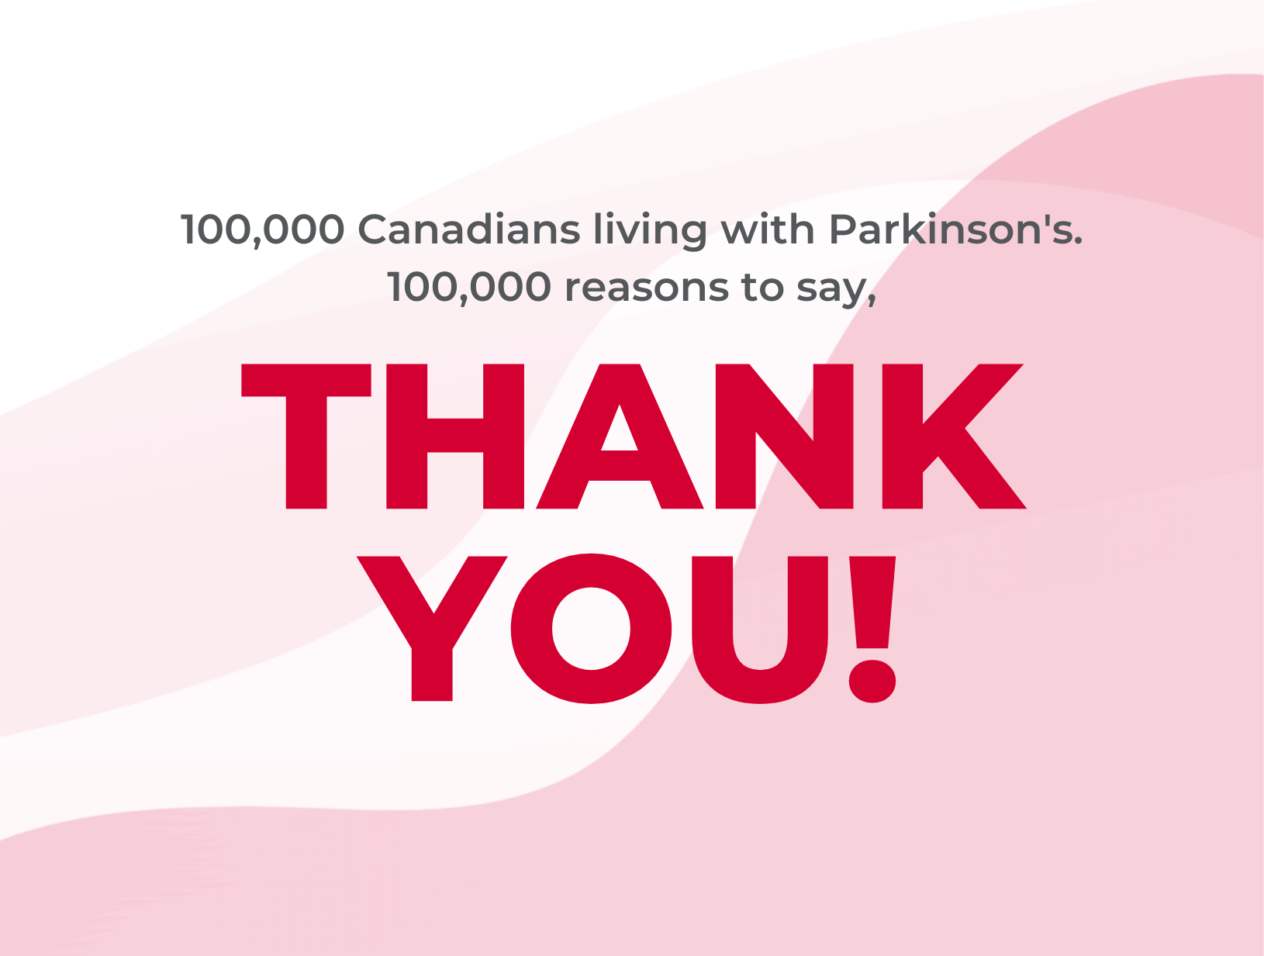 100,000 Canadians living with Parkinson's, 100,000 reasons to say thank you!